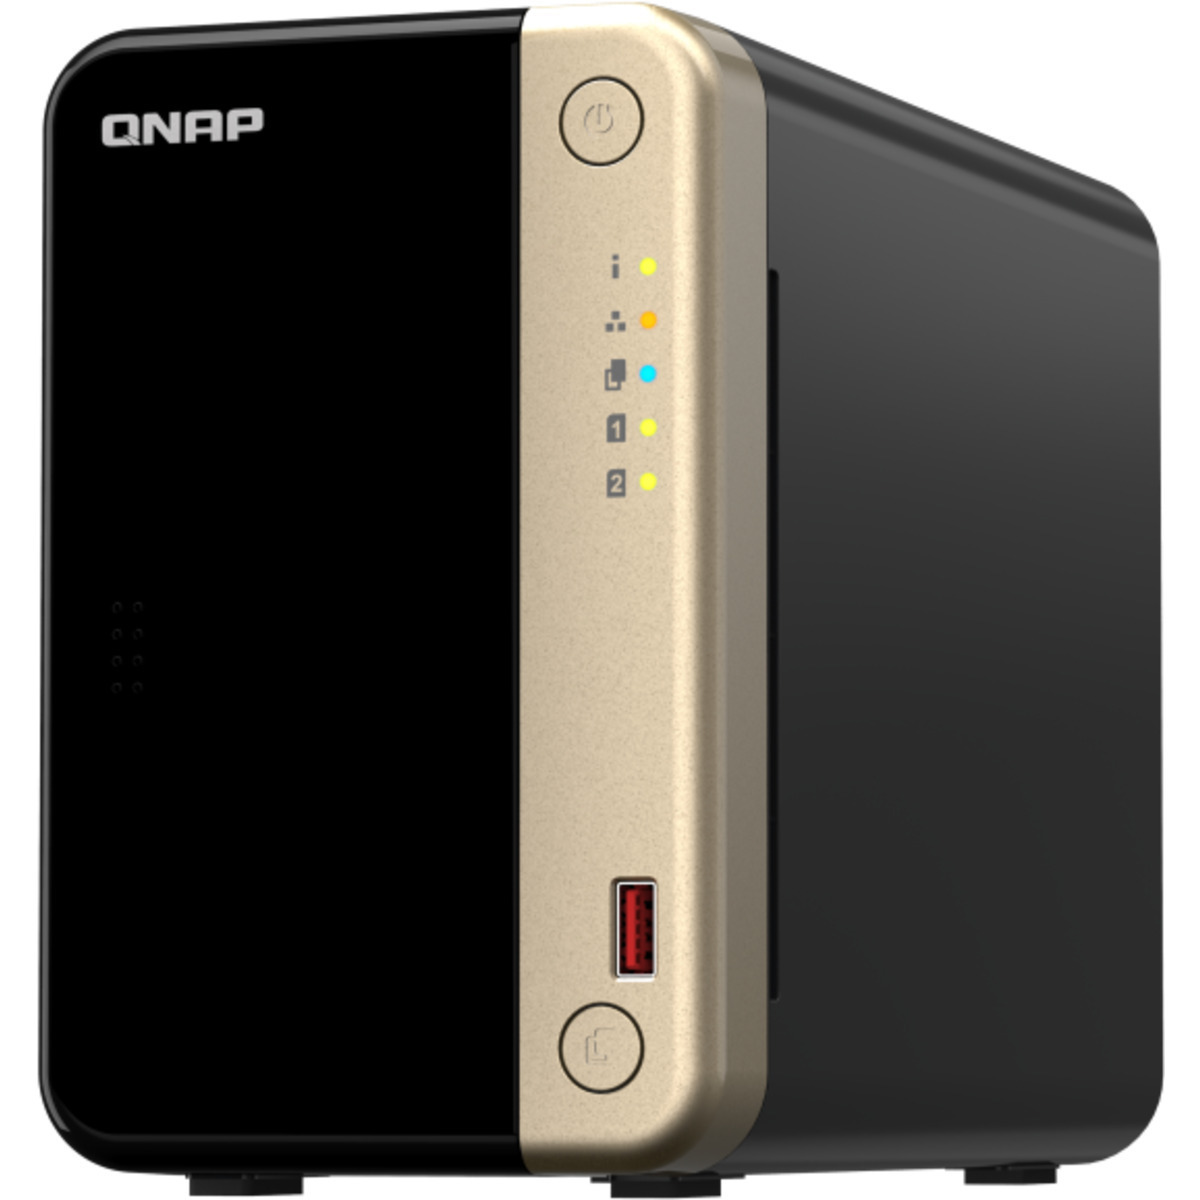 buy QNAP TS-264 2tb Desktop NAS - Network Attached Storage Device 2x1000gb Samsung 870 EVO MZ-77E1T0BAM 2.5 560/530MB/s SATA 6Gb/s SSD CONSUMER Class Drives Installed - Burn-In Tested - ON SALE - nas headquarters buy network attached storage server device das new raid-5 free shipping simply usa TS-264